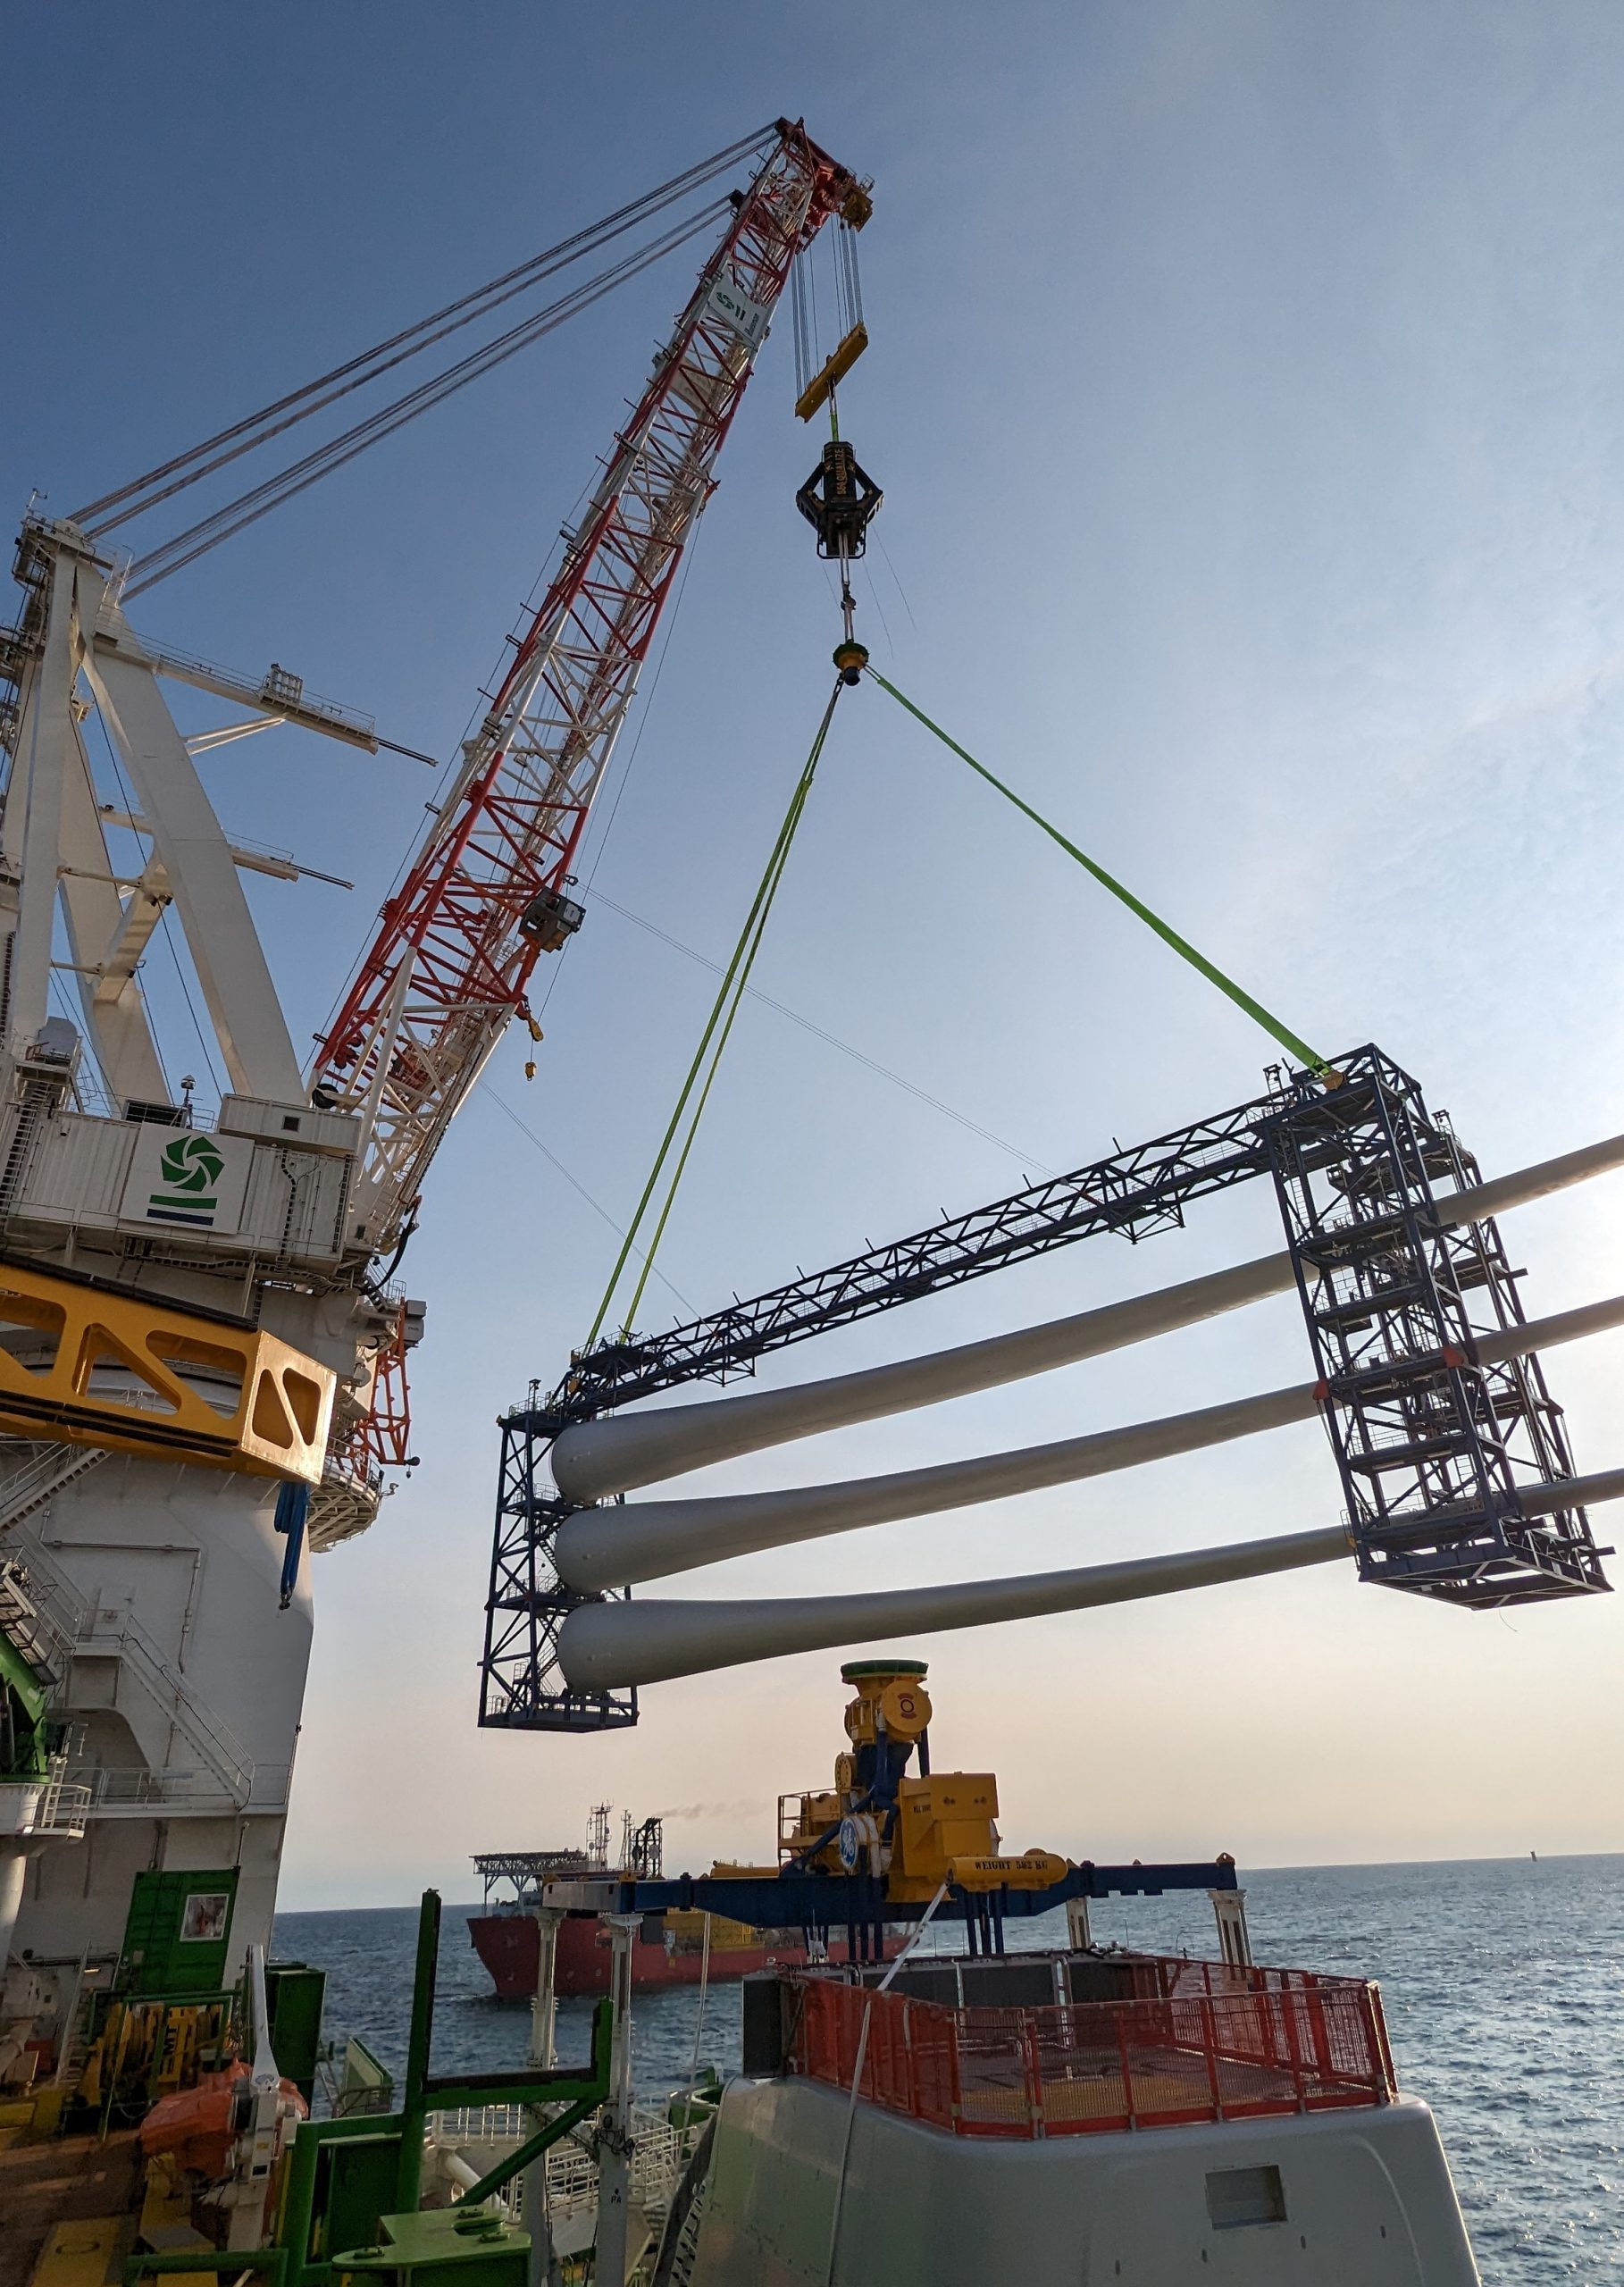 Seaqualize completes offshore transfer lifts for Vineyard Wind 1